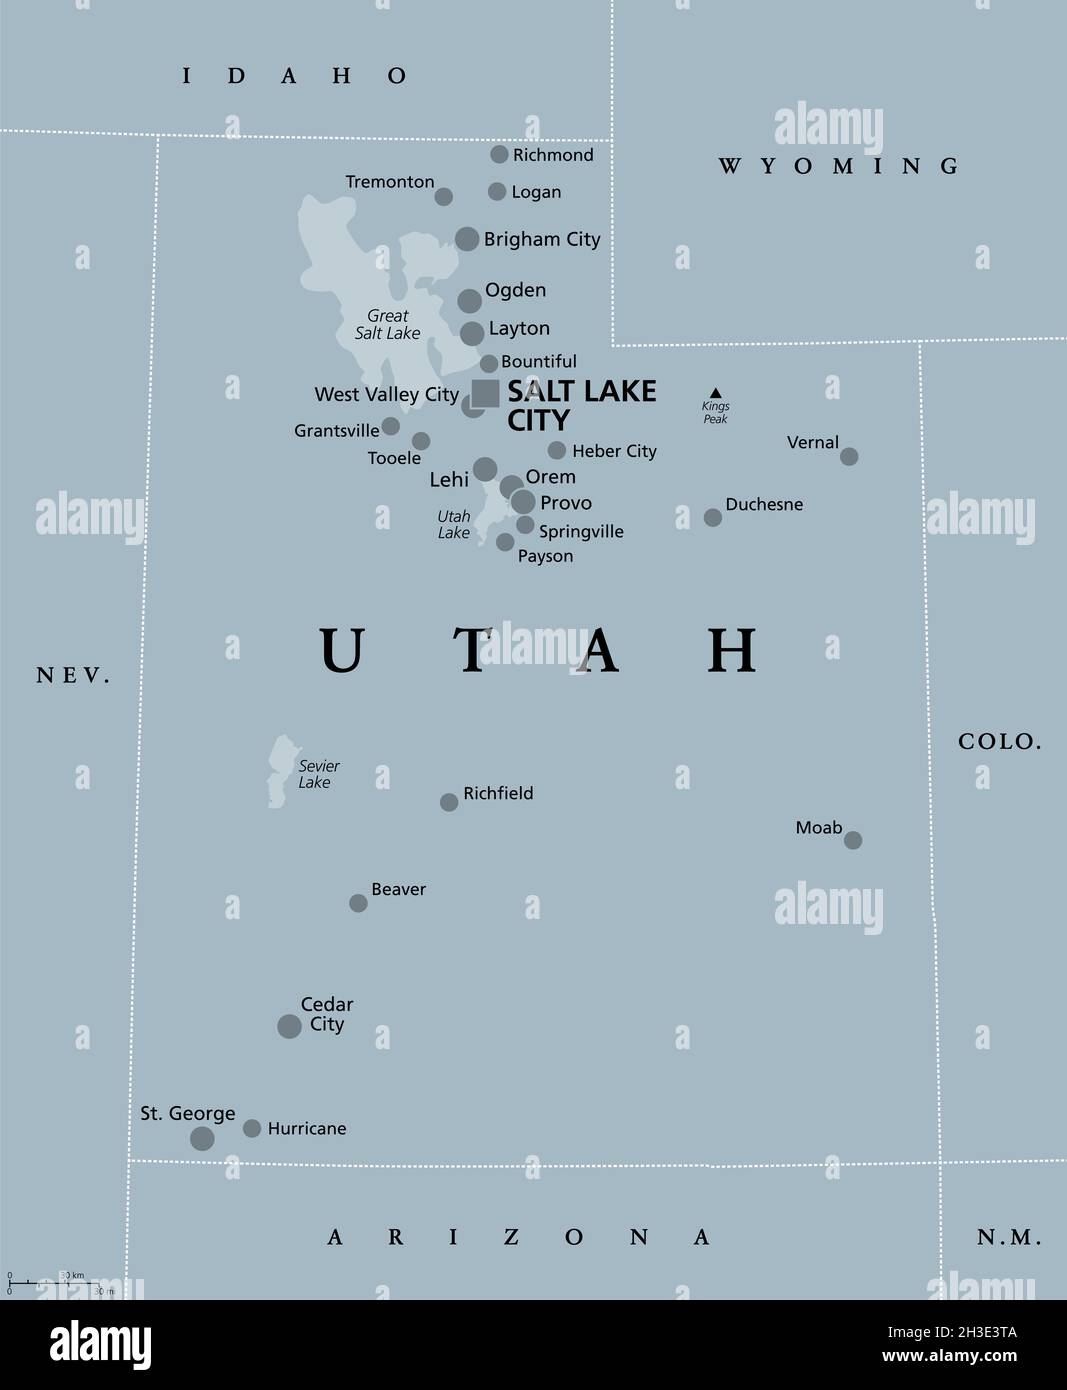 Utah, UT, gray political map, with capital Salt Lake City. State in the Mountain West subregion of the Western United States of America, Beehive State. Stock Photo